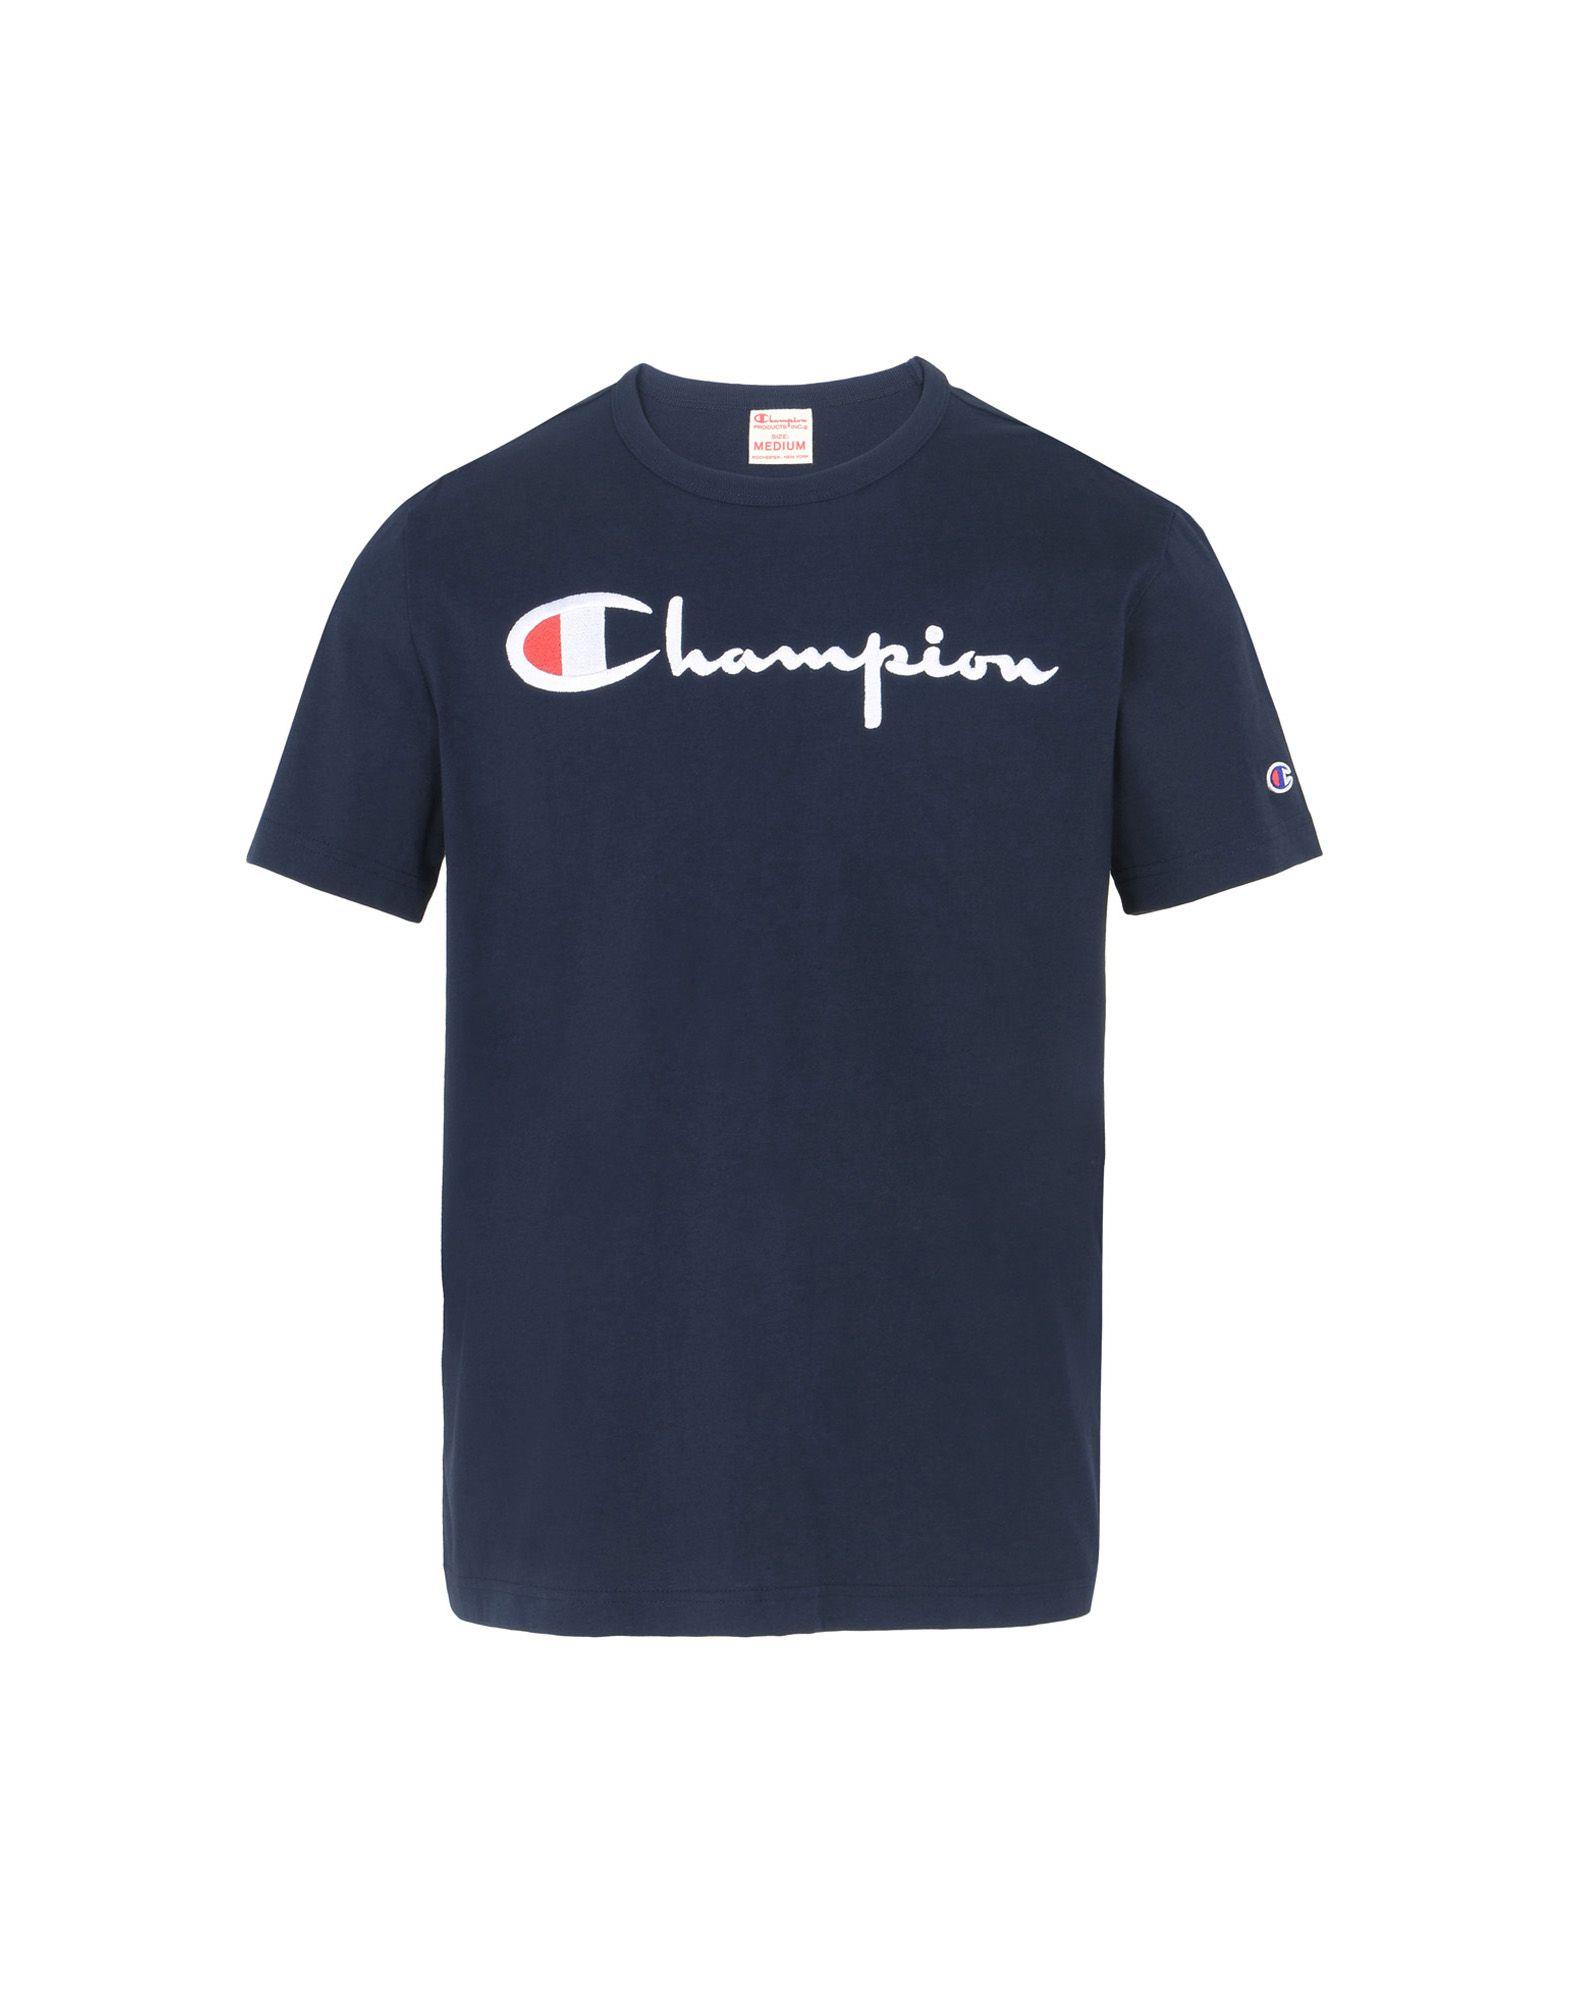 Champion Cotton T-shirt in Navy (Blue) for Men - Save 49% - Lyst